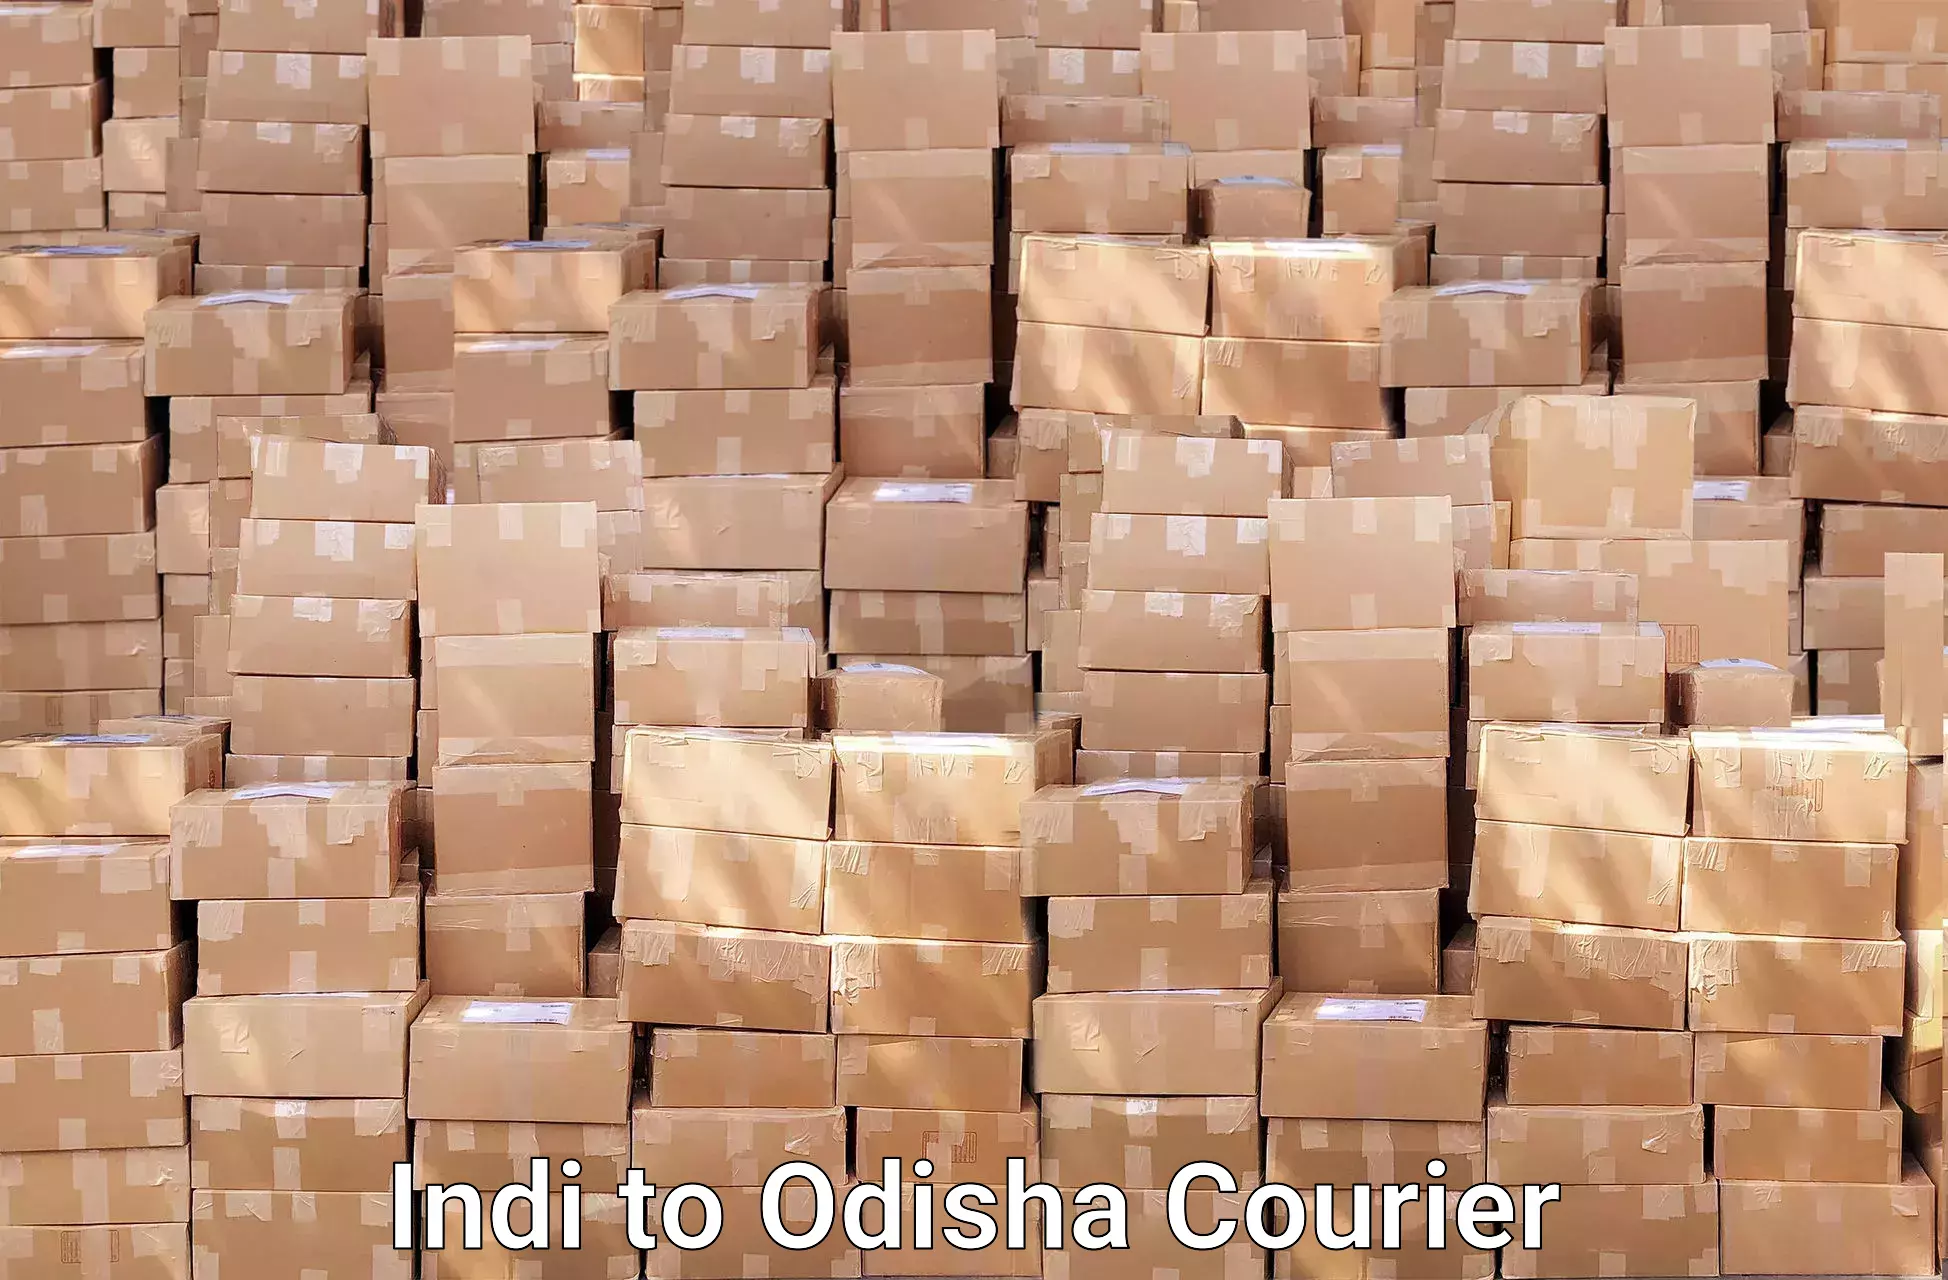 Reliable relocation services Indi to Odisha